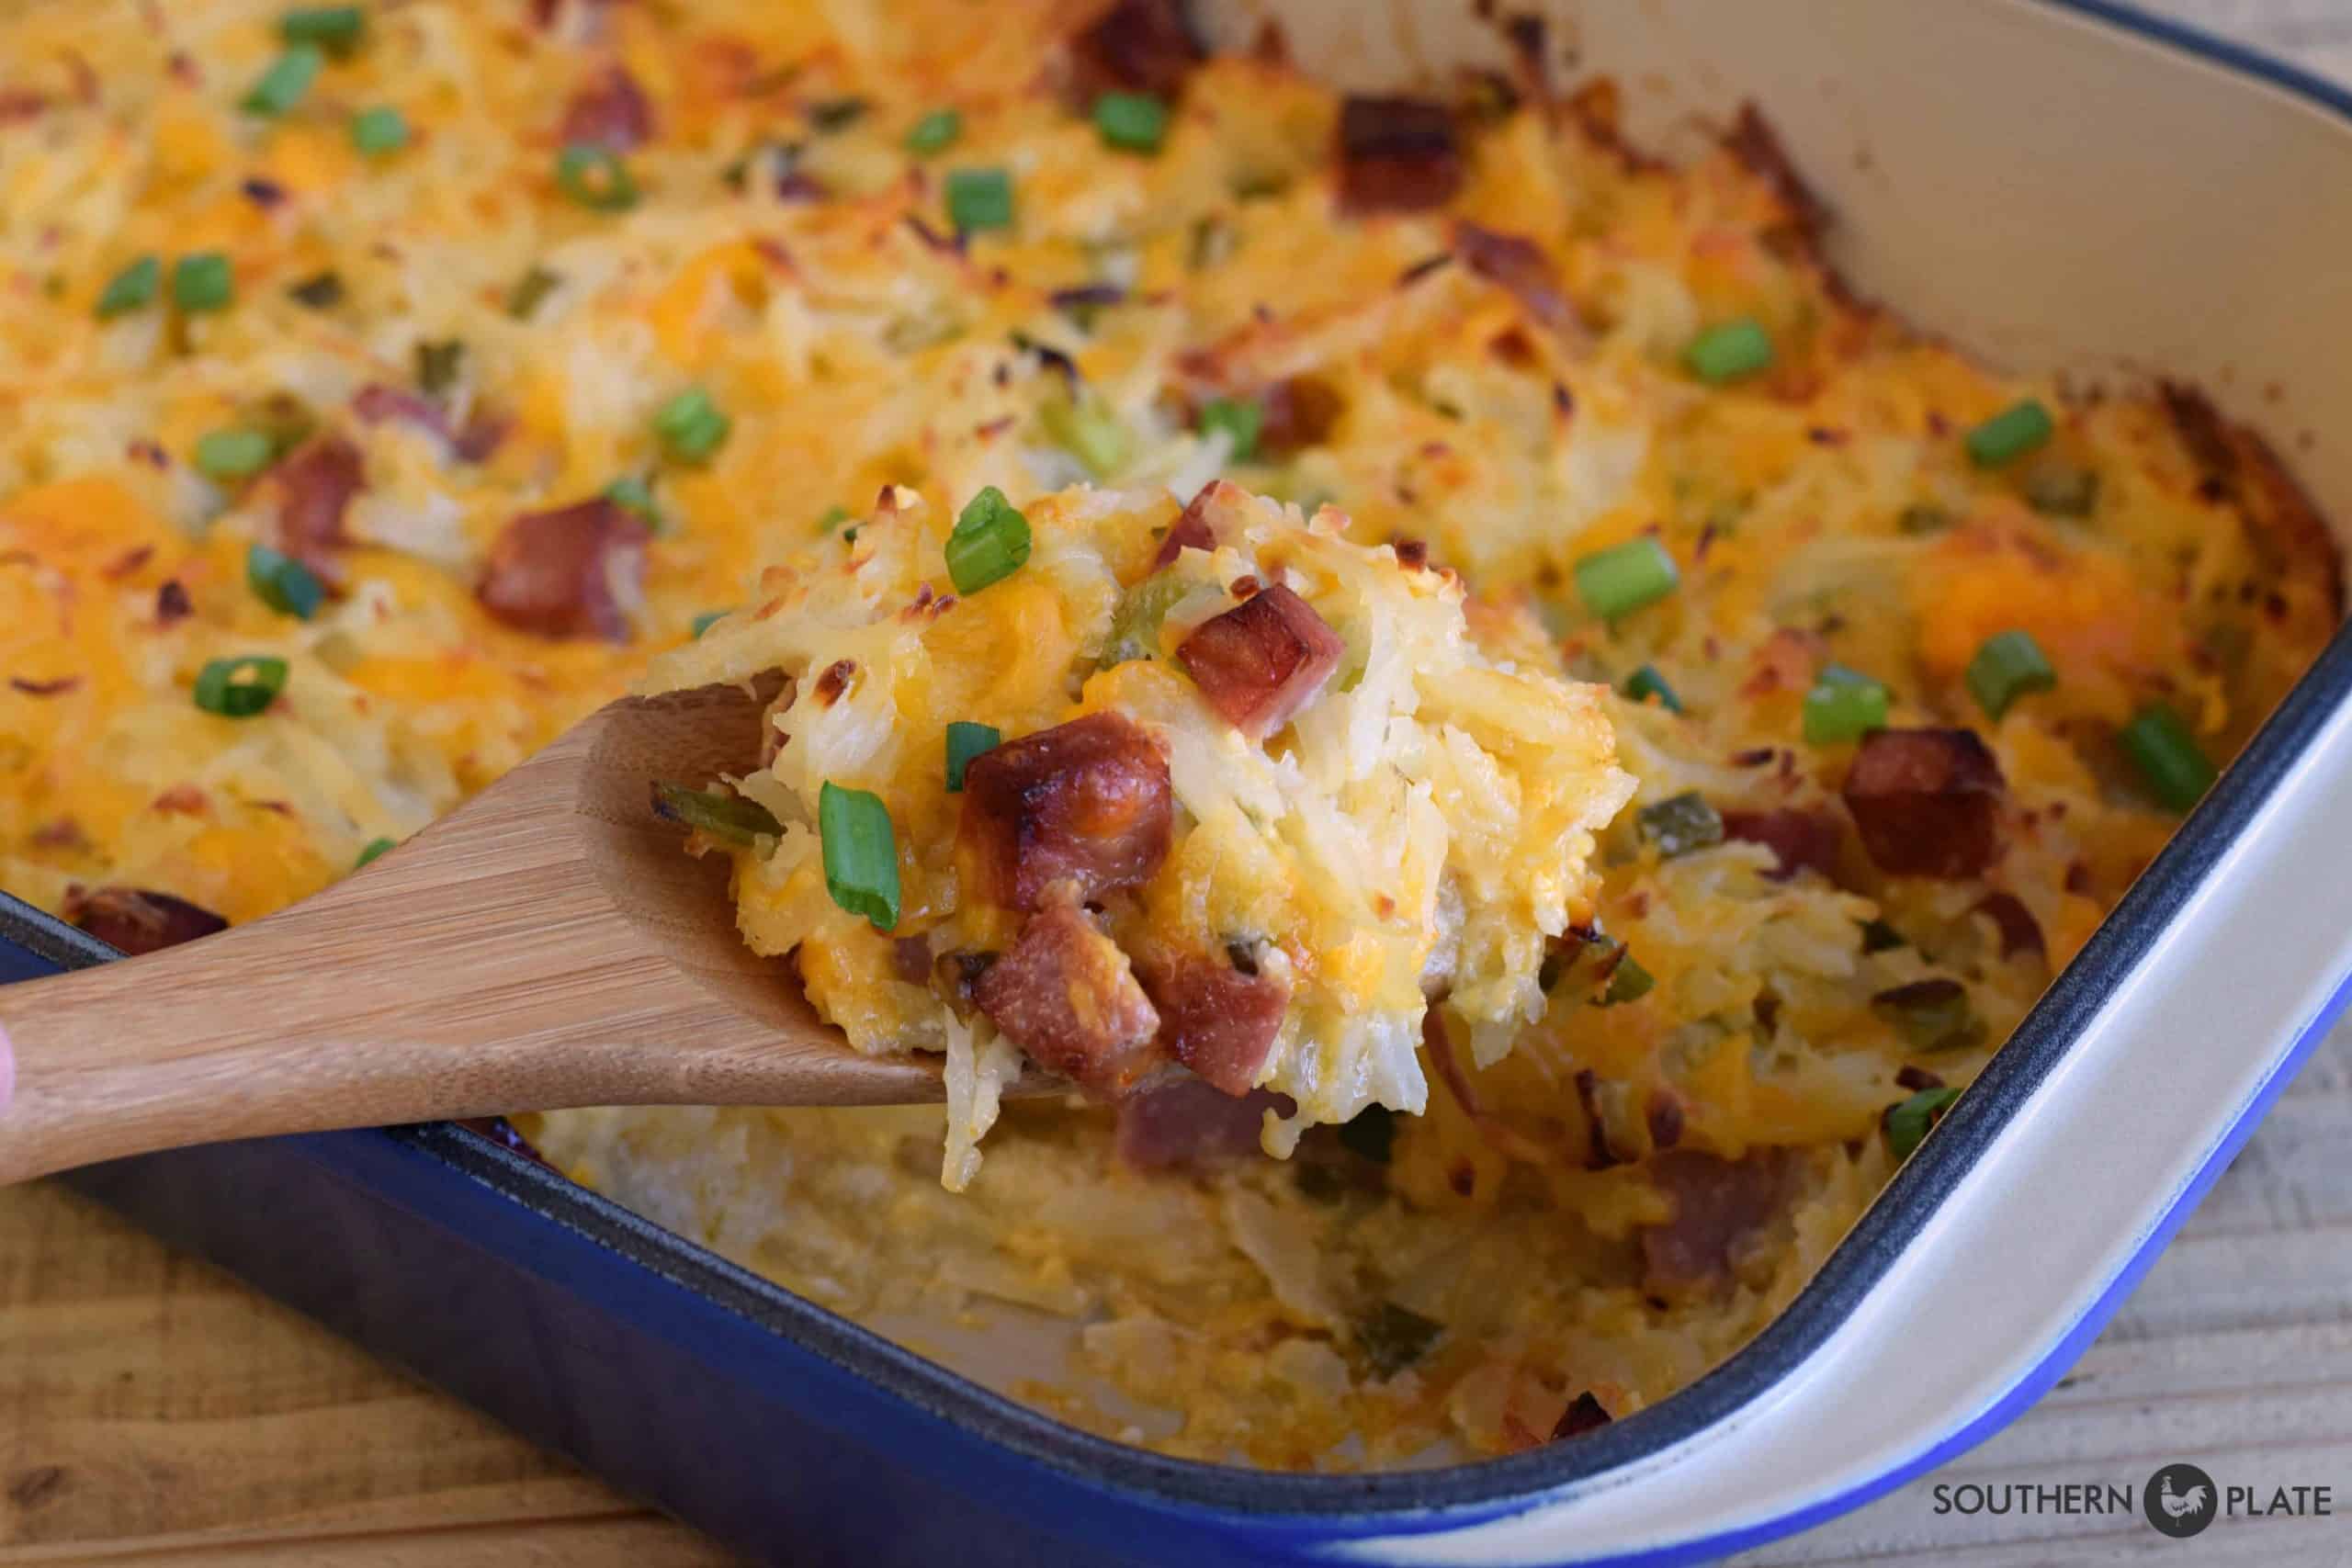 Deluxe hash brown casserole with Thanksgiving ham leftovers